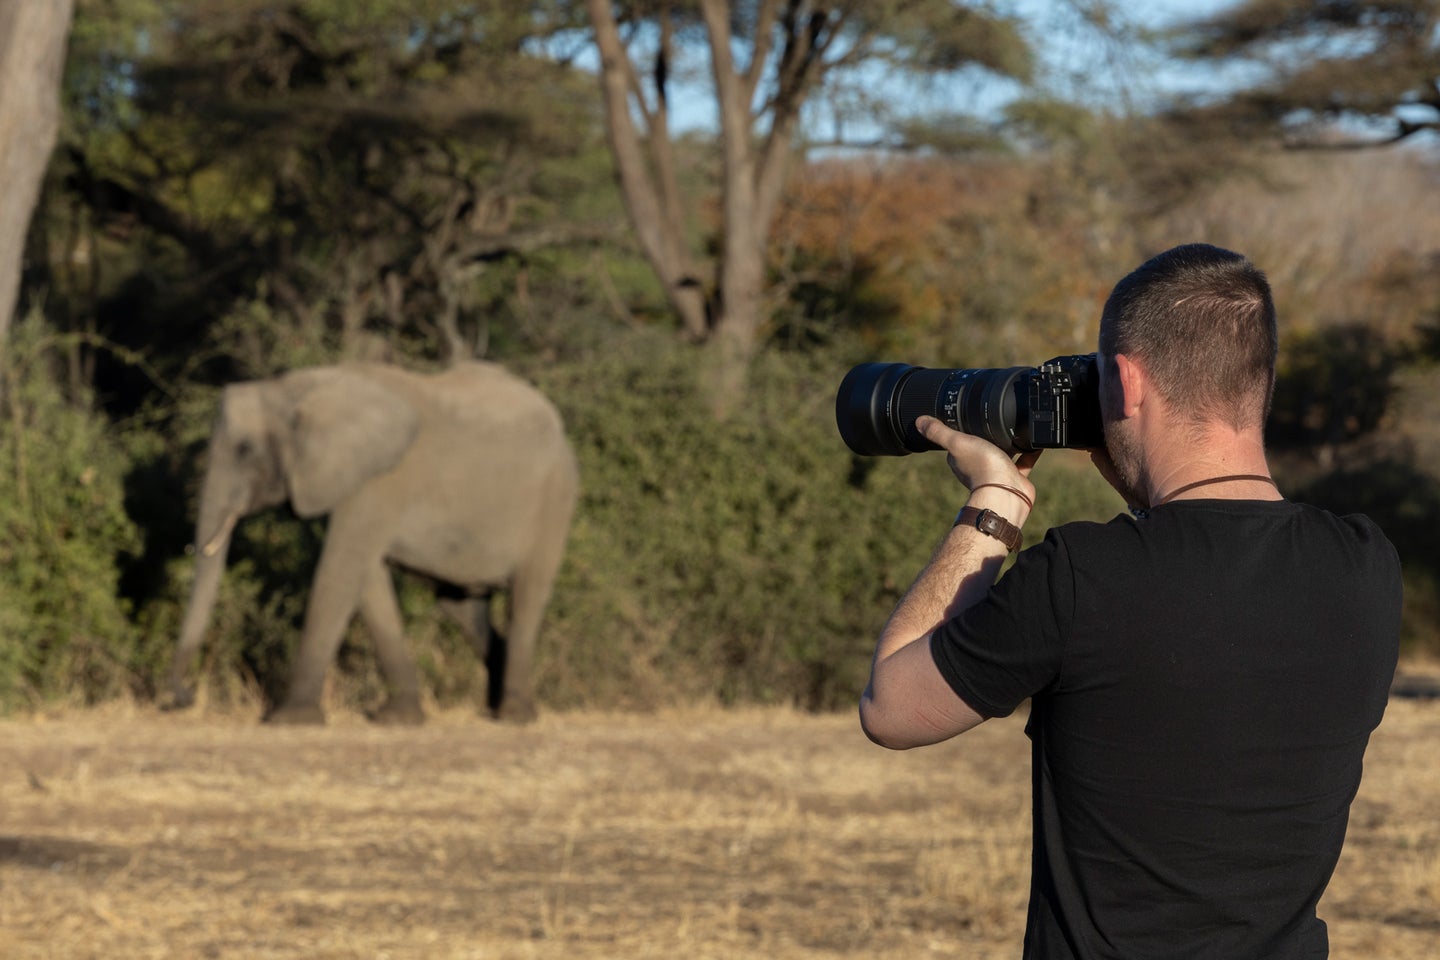 A man holds a Fujifilm camera with Sigma 100-400mm F5-6.3 DG DN OS | Contemporary lens while photographing an elephant